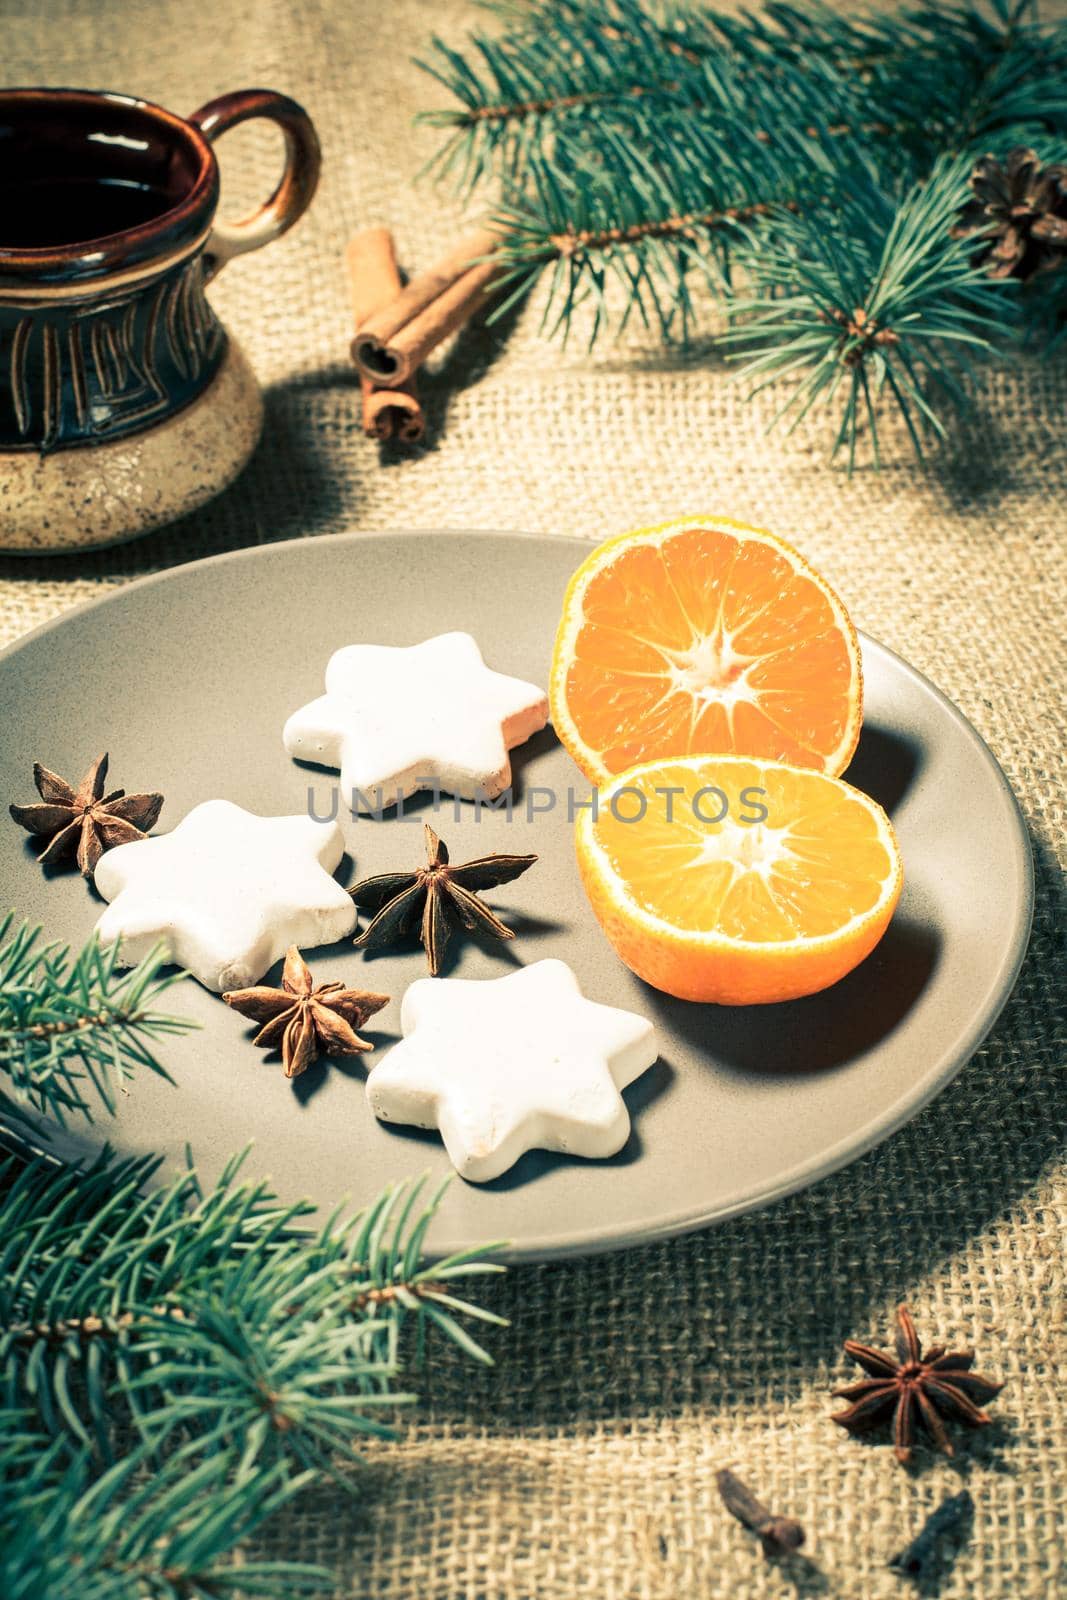 Gingerbread cookies in star shape on plate with cinnamon, star anise and natural fir tree branches with cones, cup of coffee on sackcloth. Color toning effect.